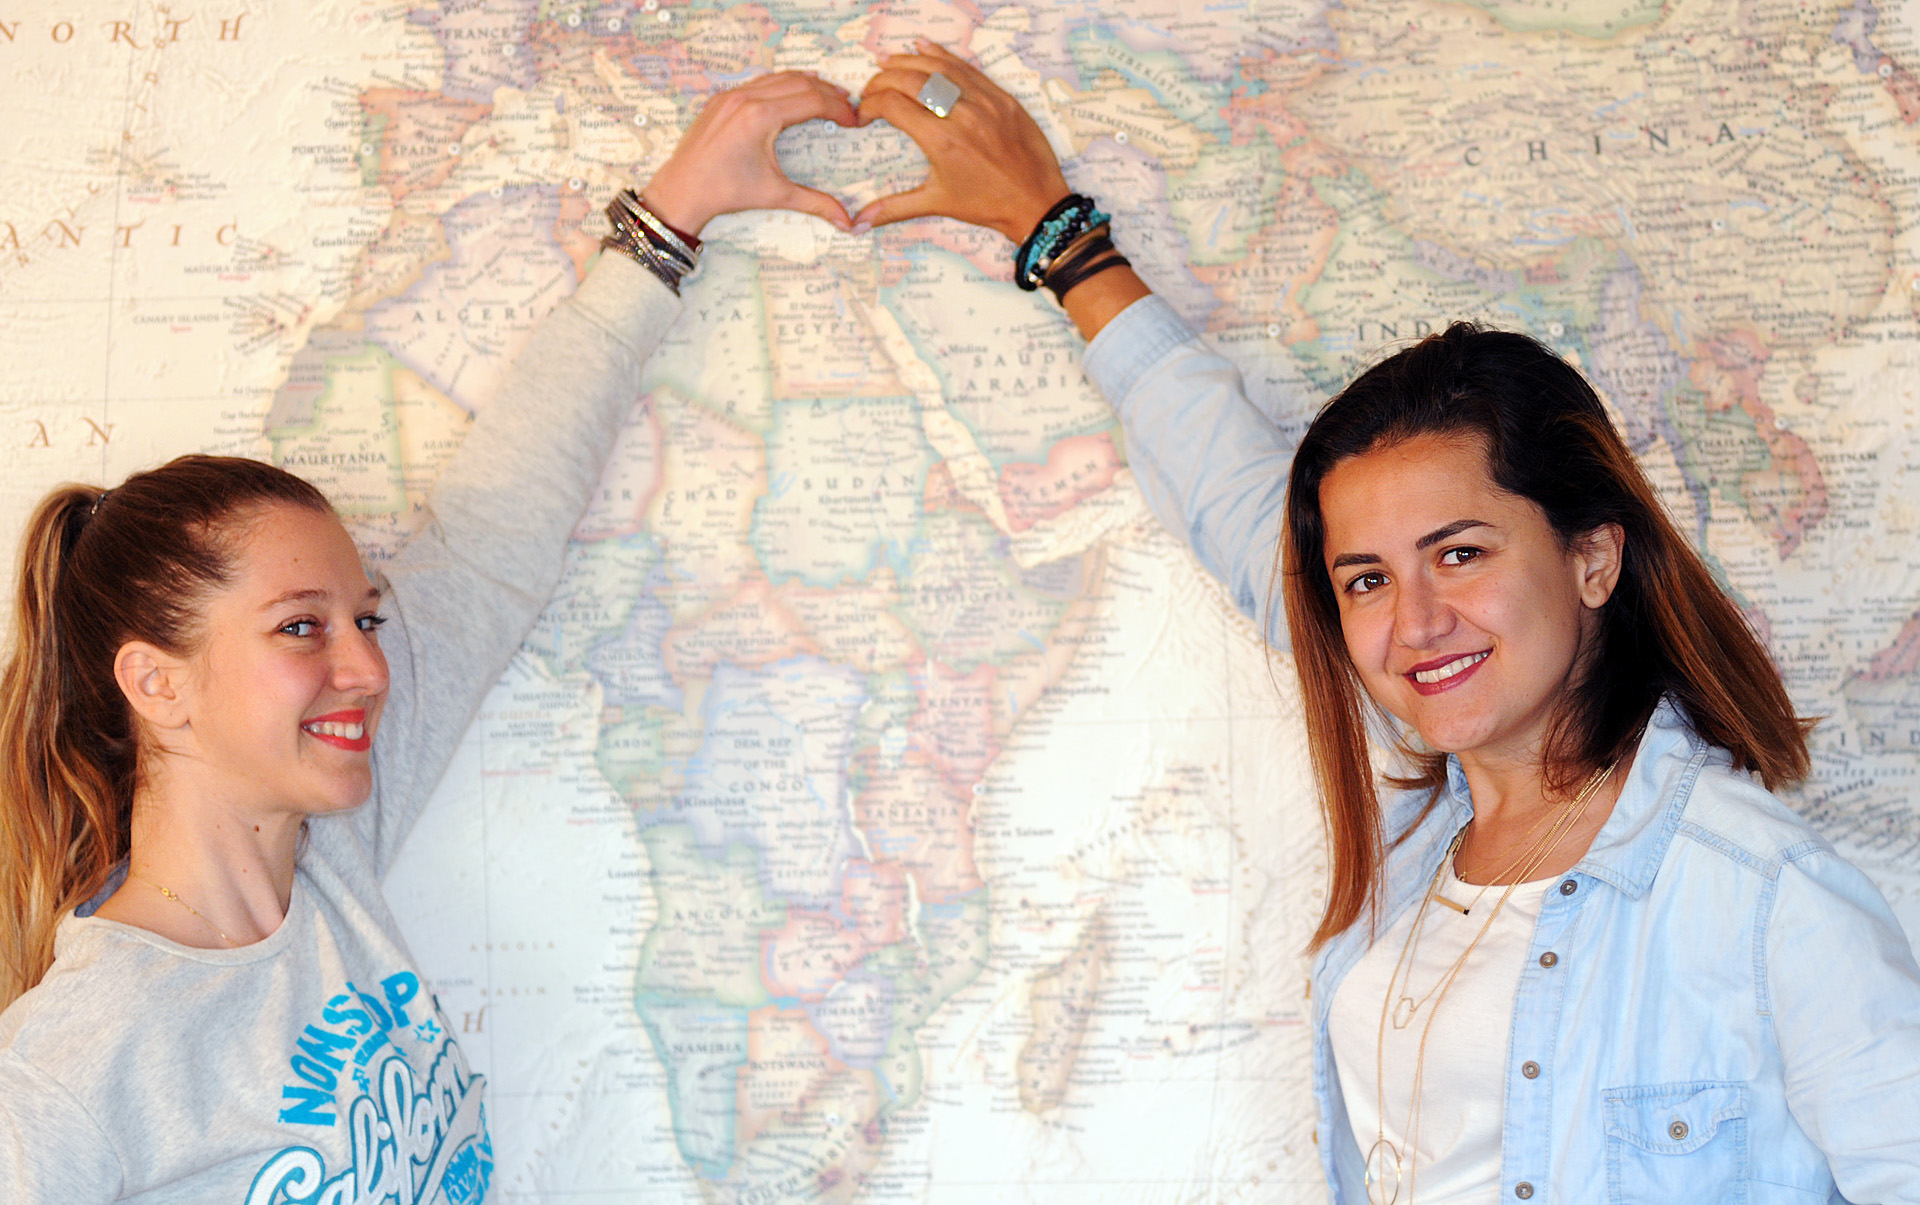 Pinar & Gizem in front of a large world map and making a heart shape around Turkey with their hands